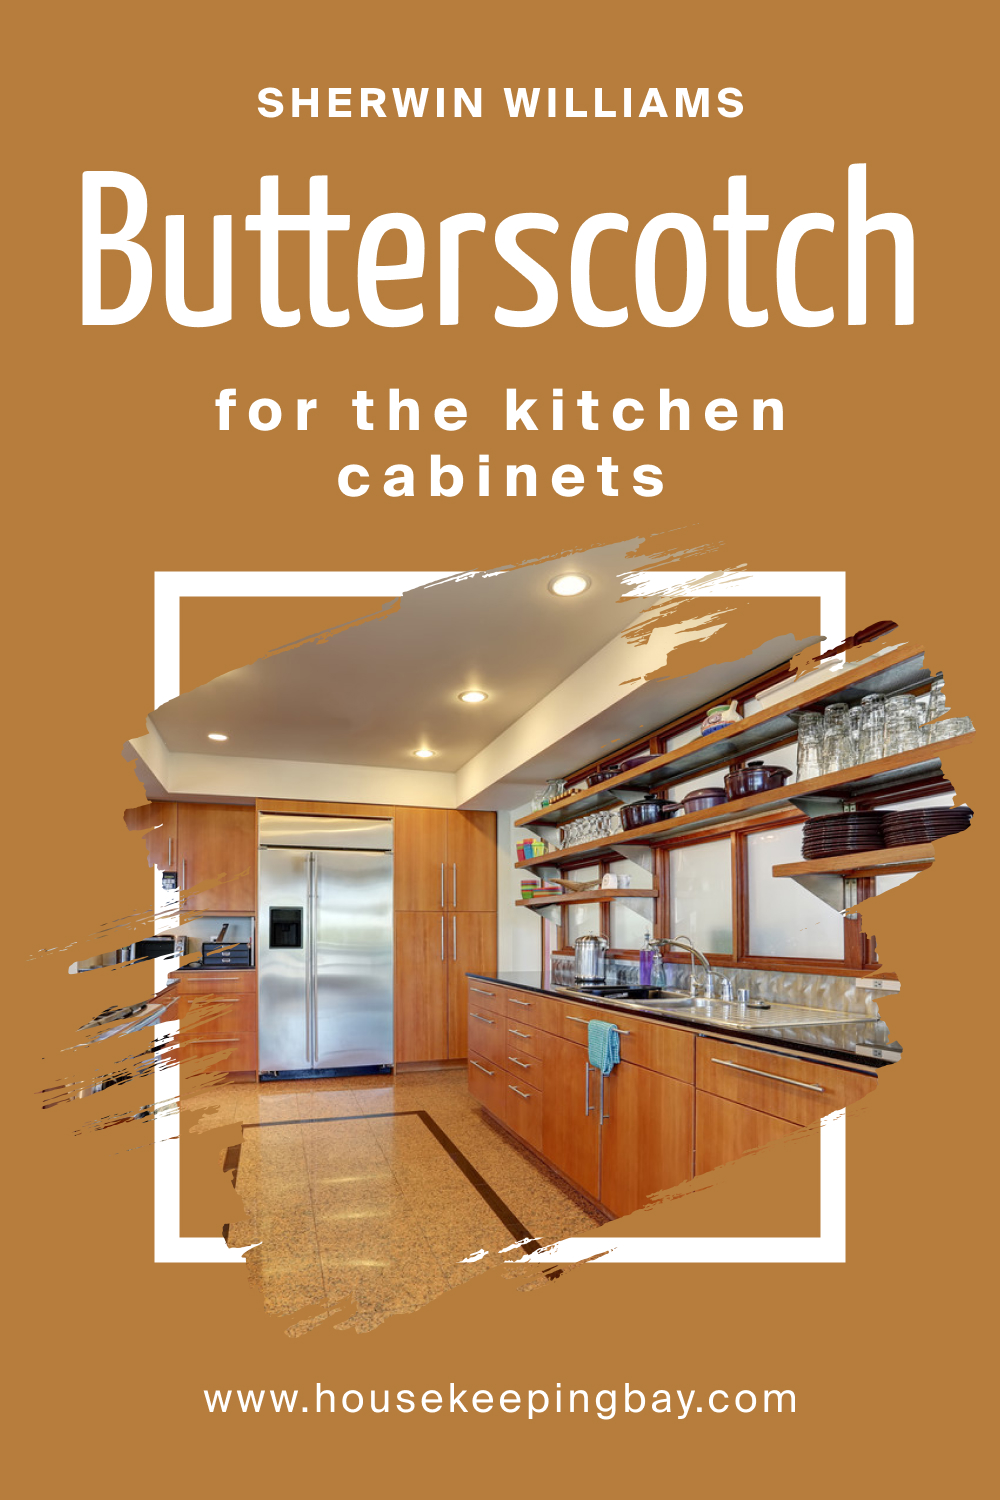 Sherwin Williams. SW 6377 Butterscotch For the Kitchen Cabinets